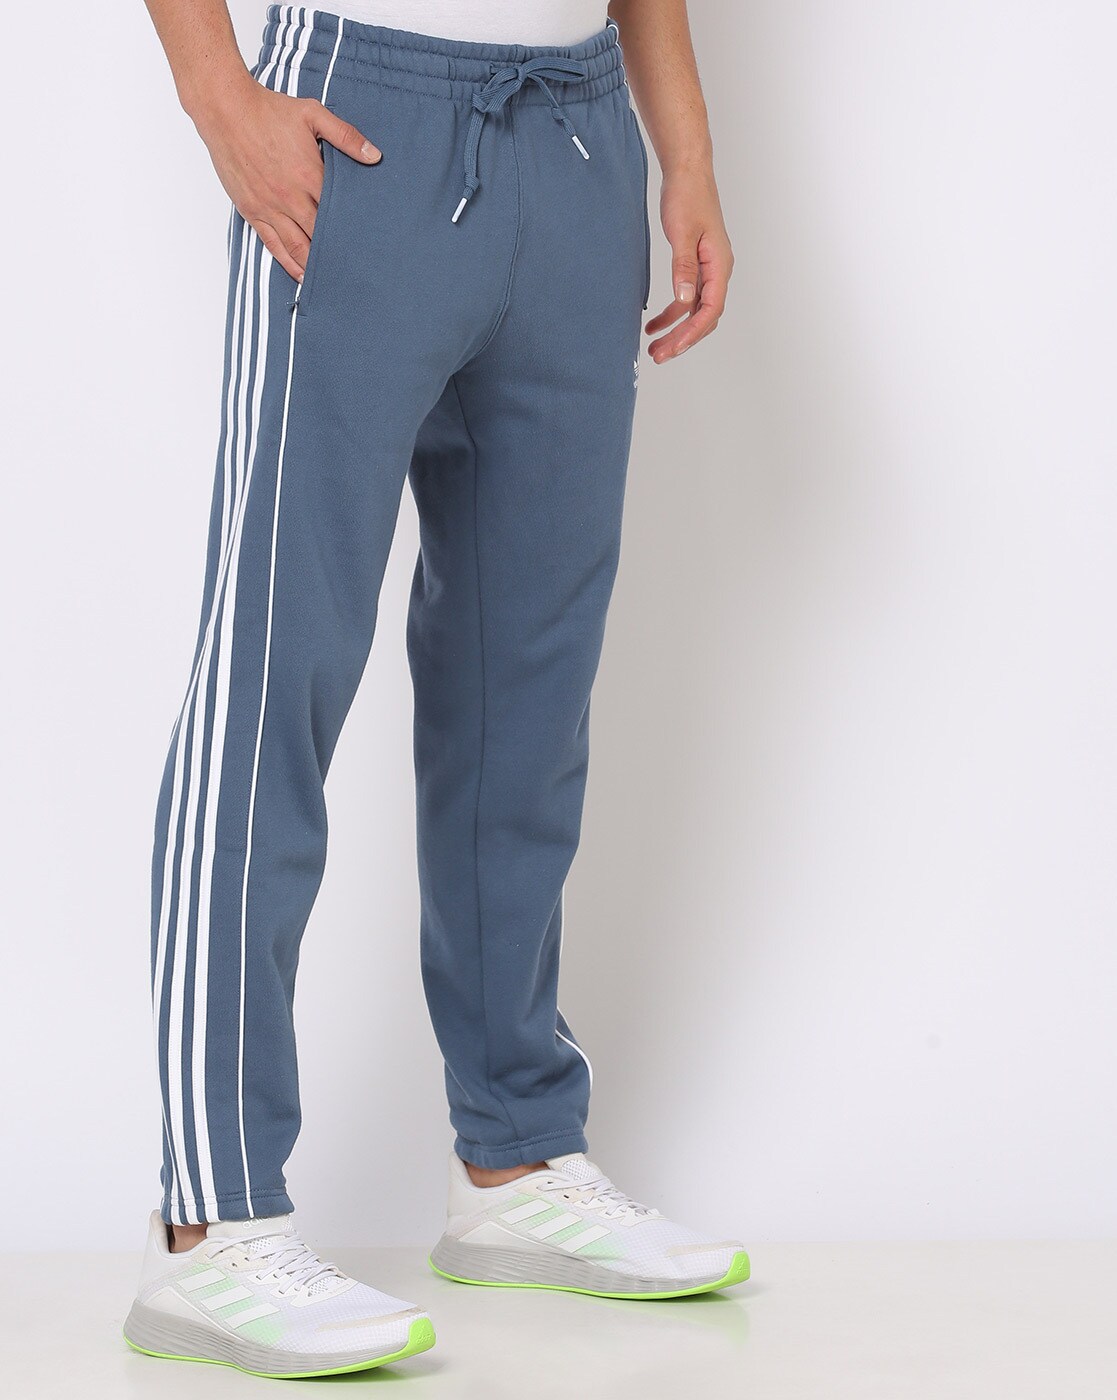 adidas W Fi Wv Pant Black Sports Track Pant Buy adidas W Fi Wv Pant Black  Sports Track Pant Online at Best Price in India  Nykaa